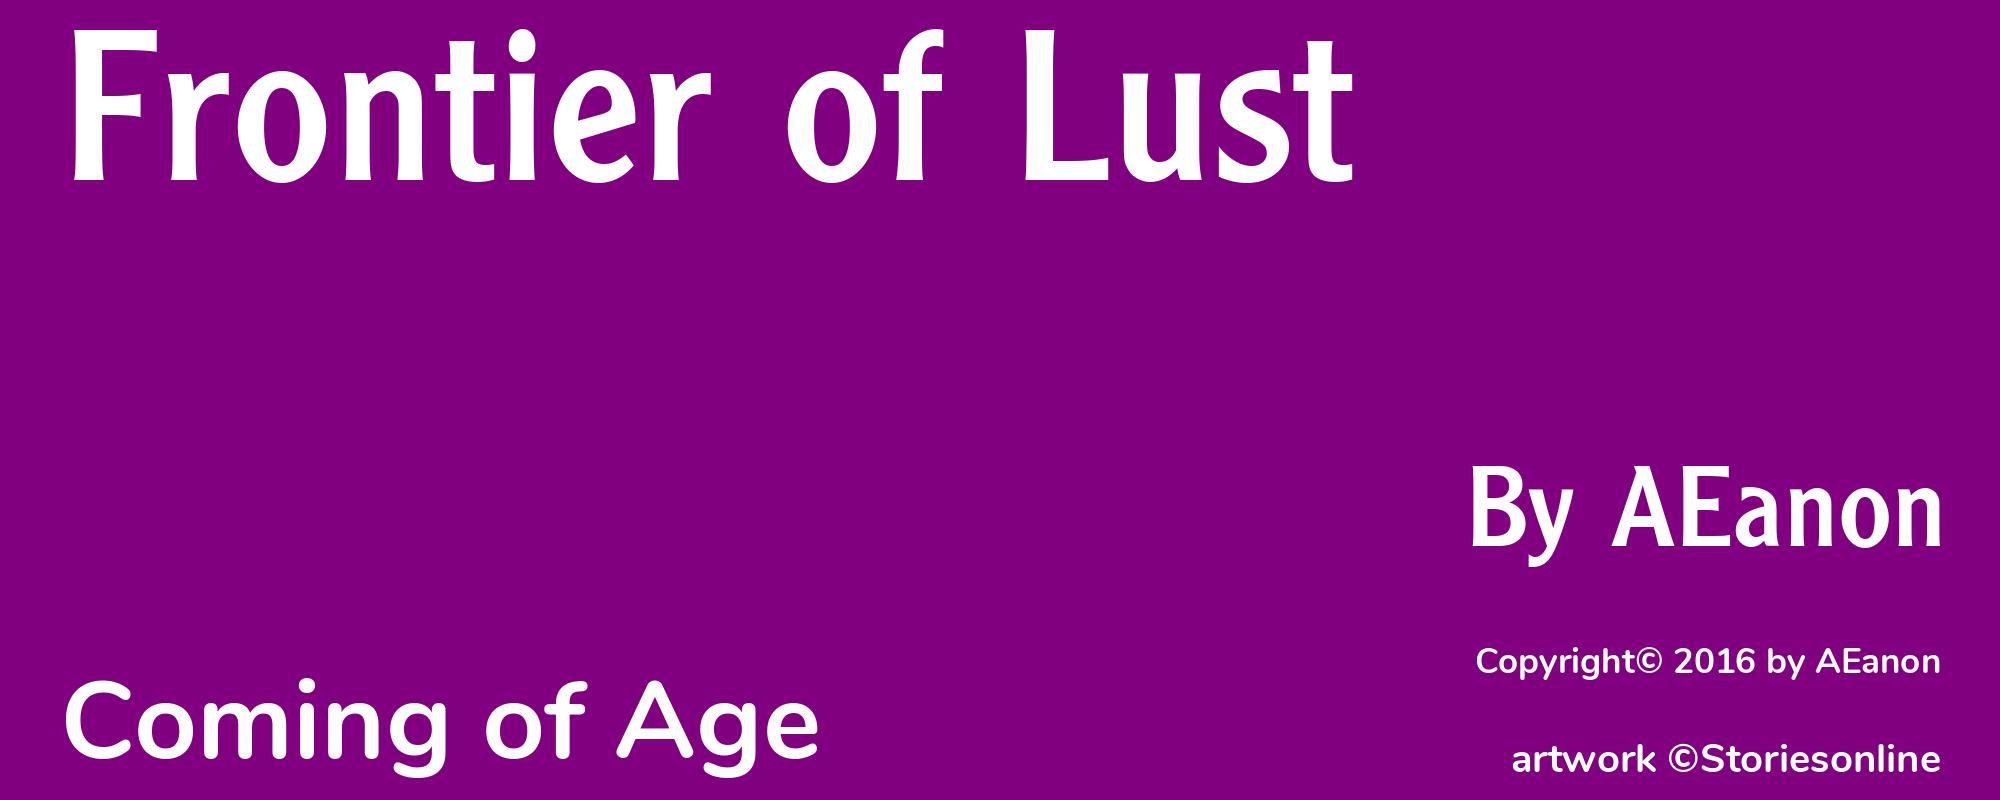 Frontier of Lust - Cover